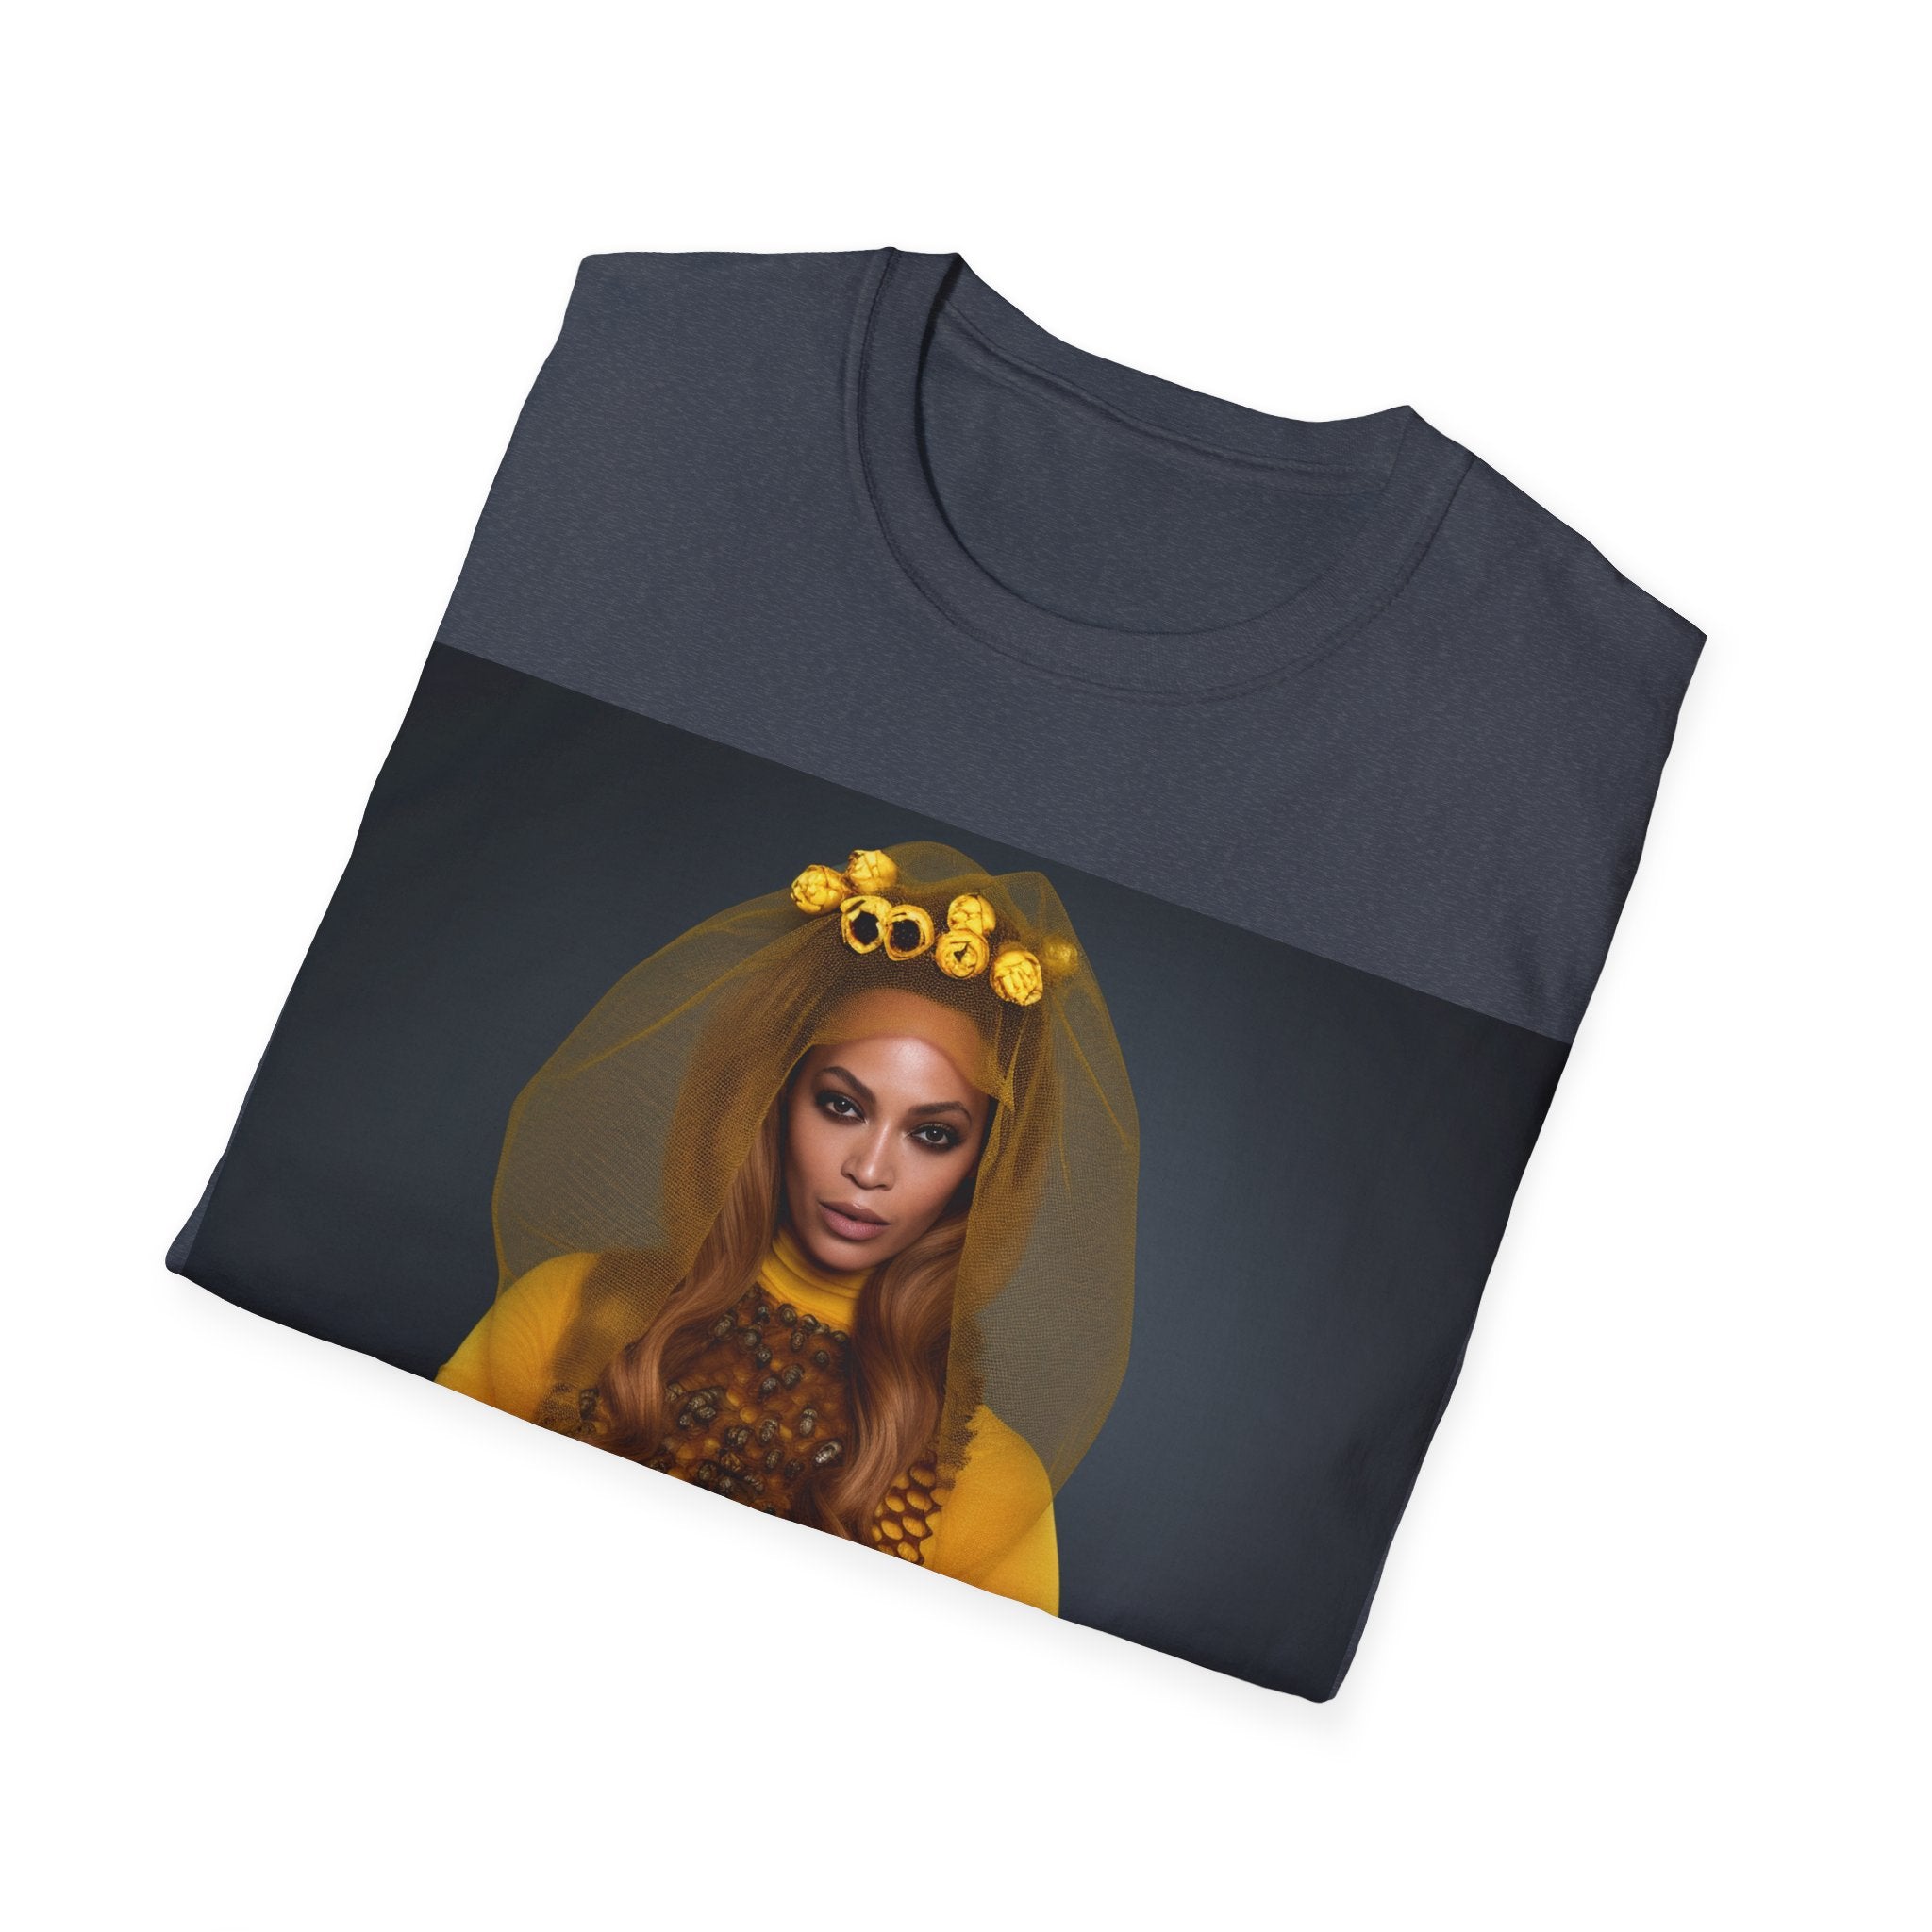 Beehive Queen Music Icon Tribute Unisex Softstyle T-Shirt - Celebrate the Legendary Female Artist with Comfort and Style